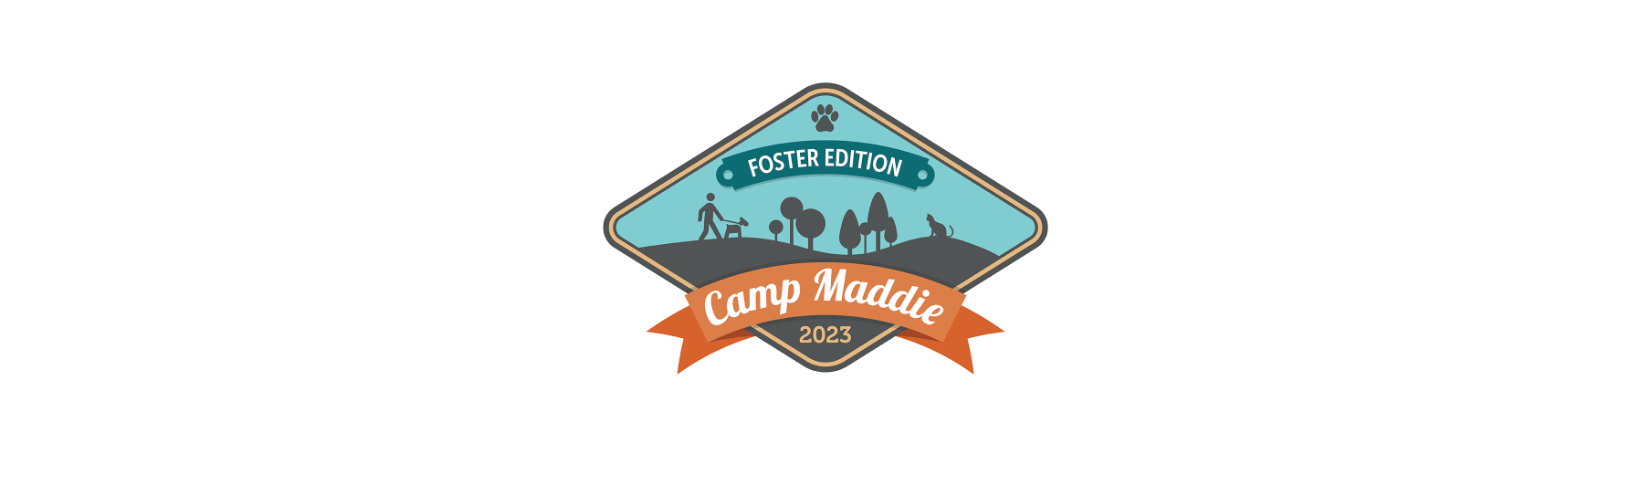 Camp Maddie: Foster Edition - Expanding Foster Programs with Foster+ at Dallas Pets Alive!